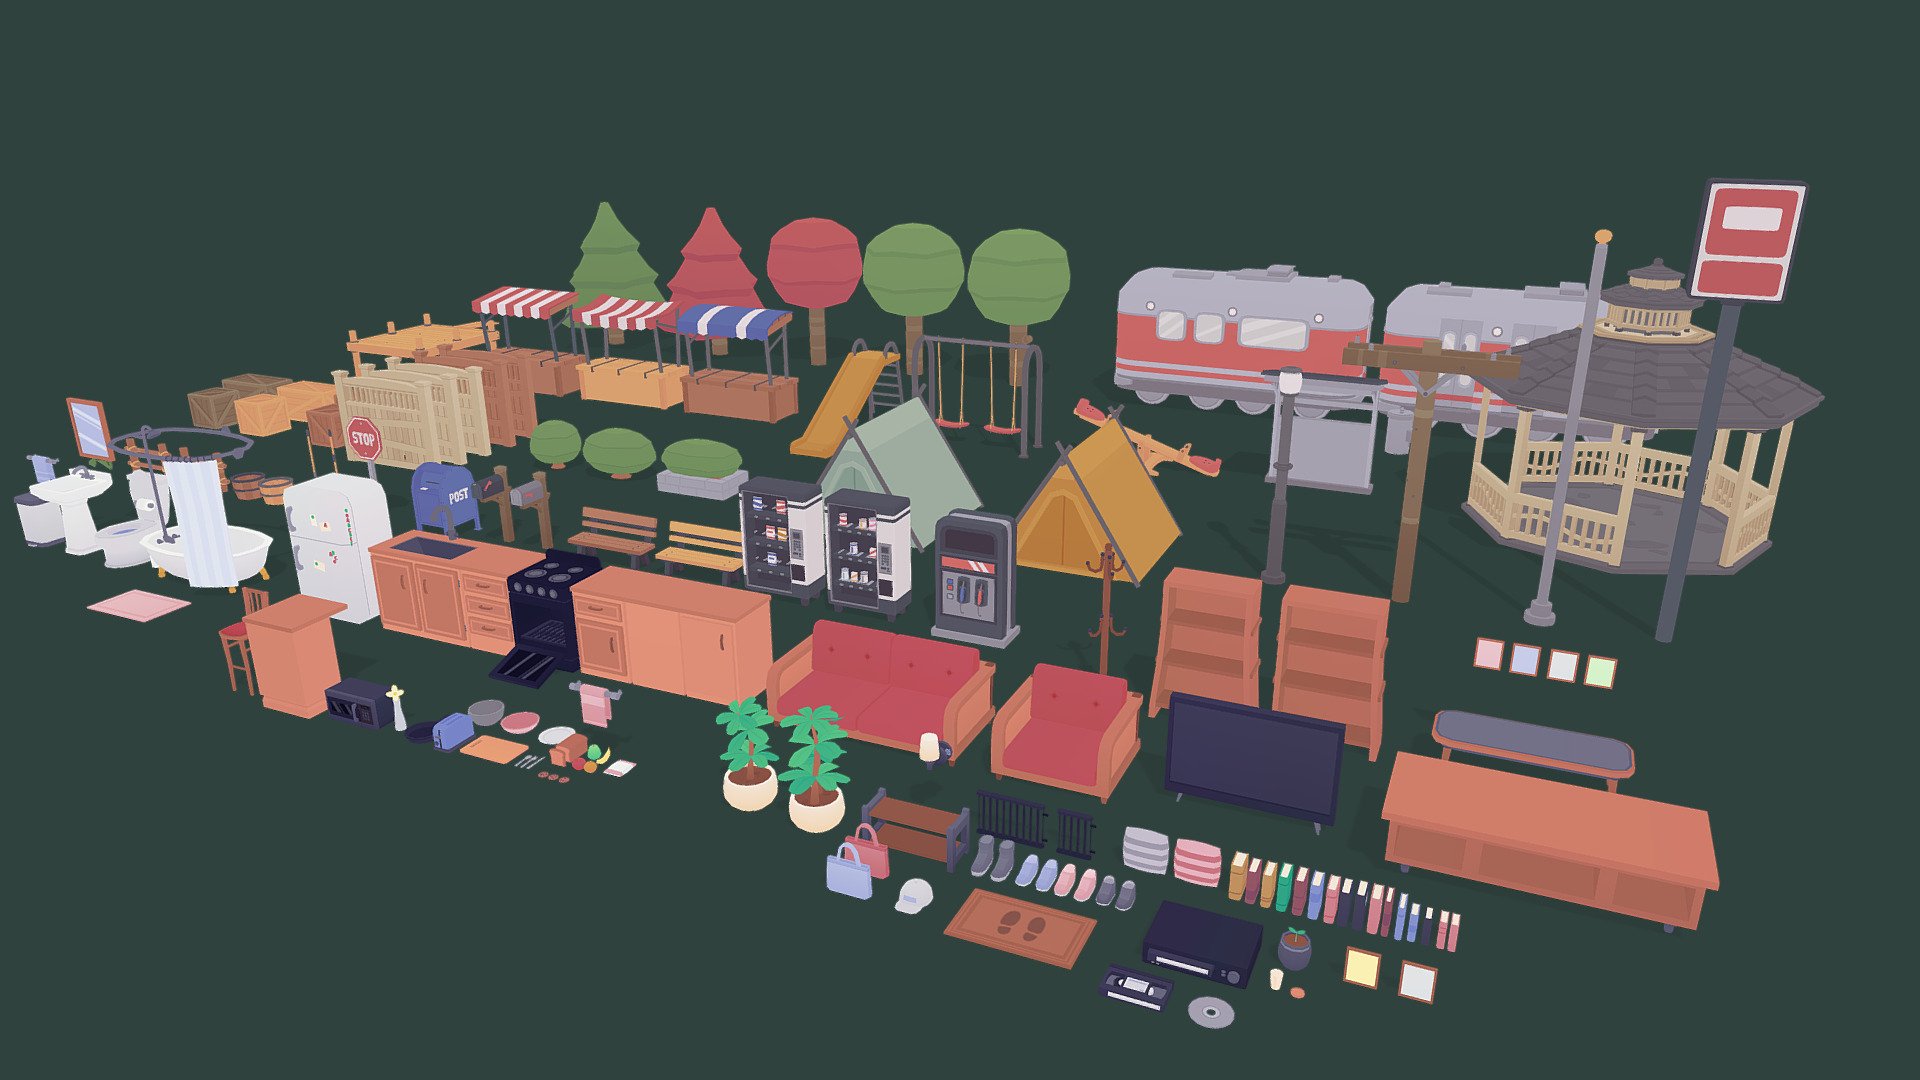 An assortment of props that could be found inside a house or outside in a small town.

Mostly textured with gradients. Created in Blender 3d model